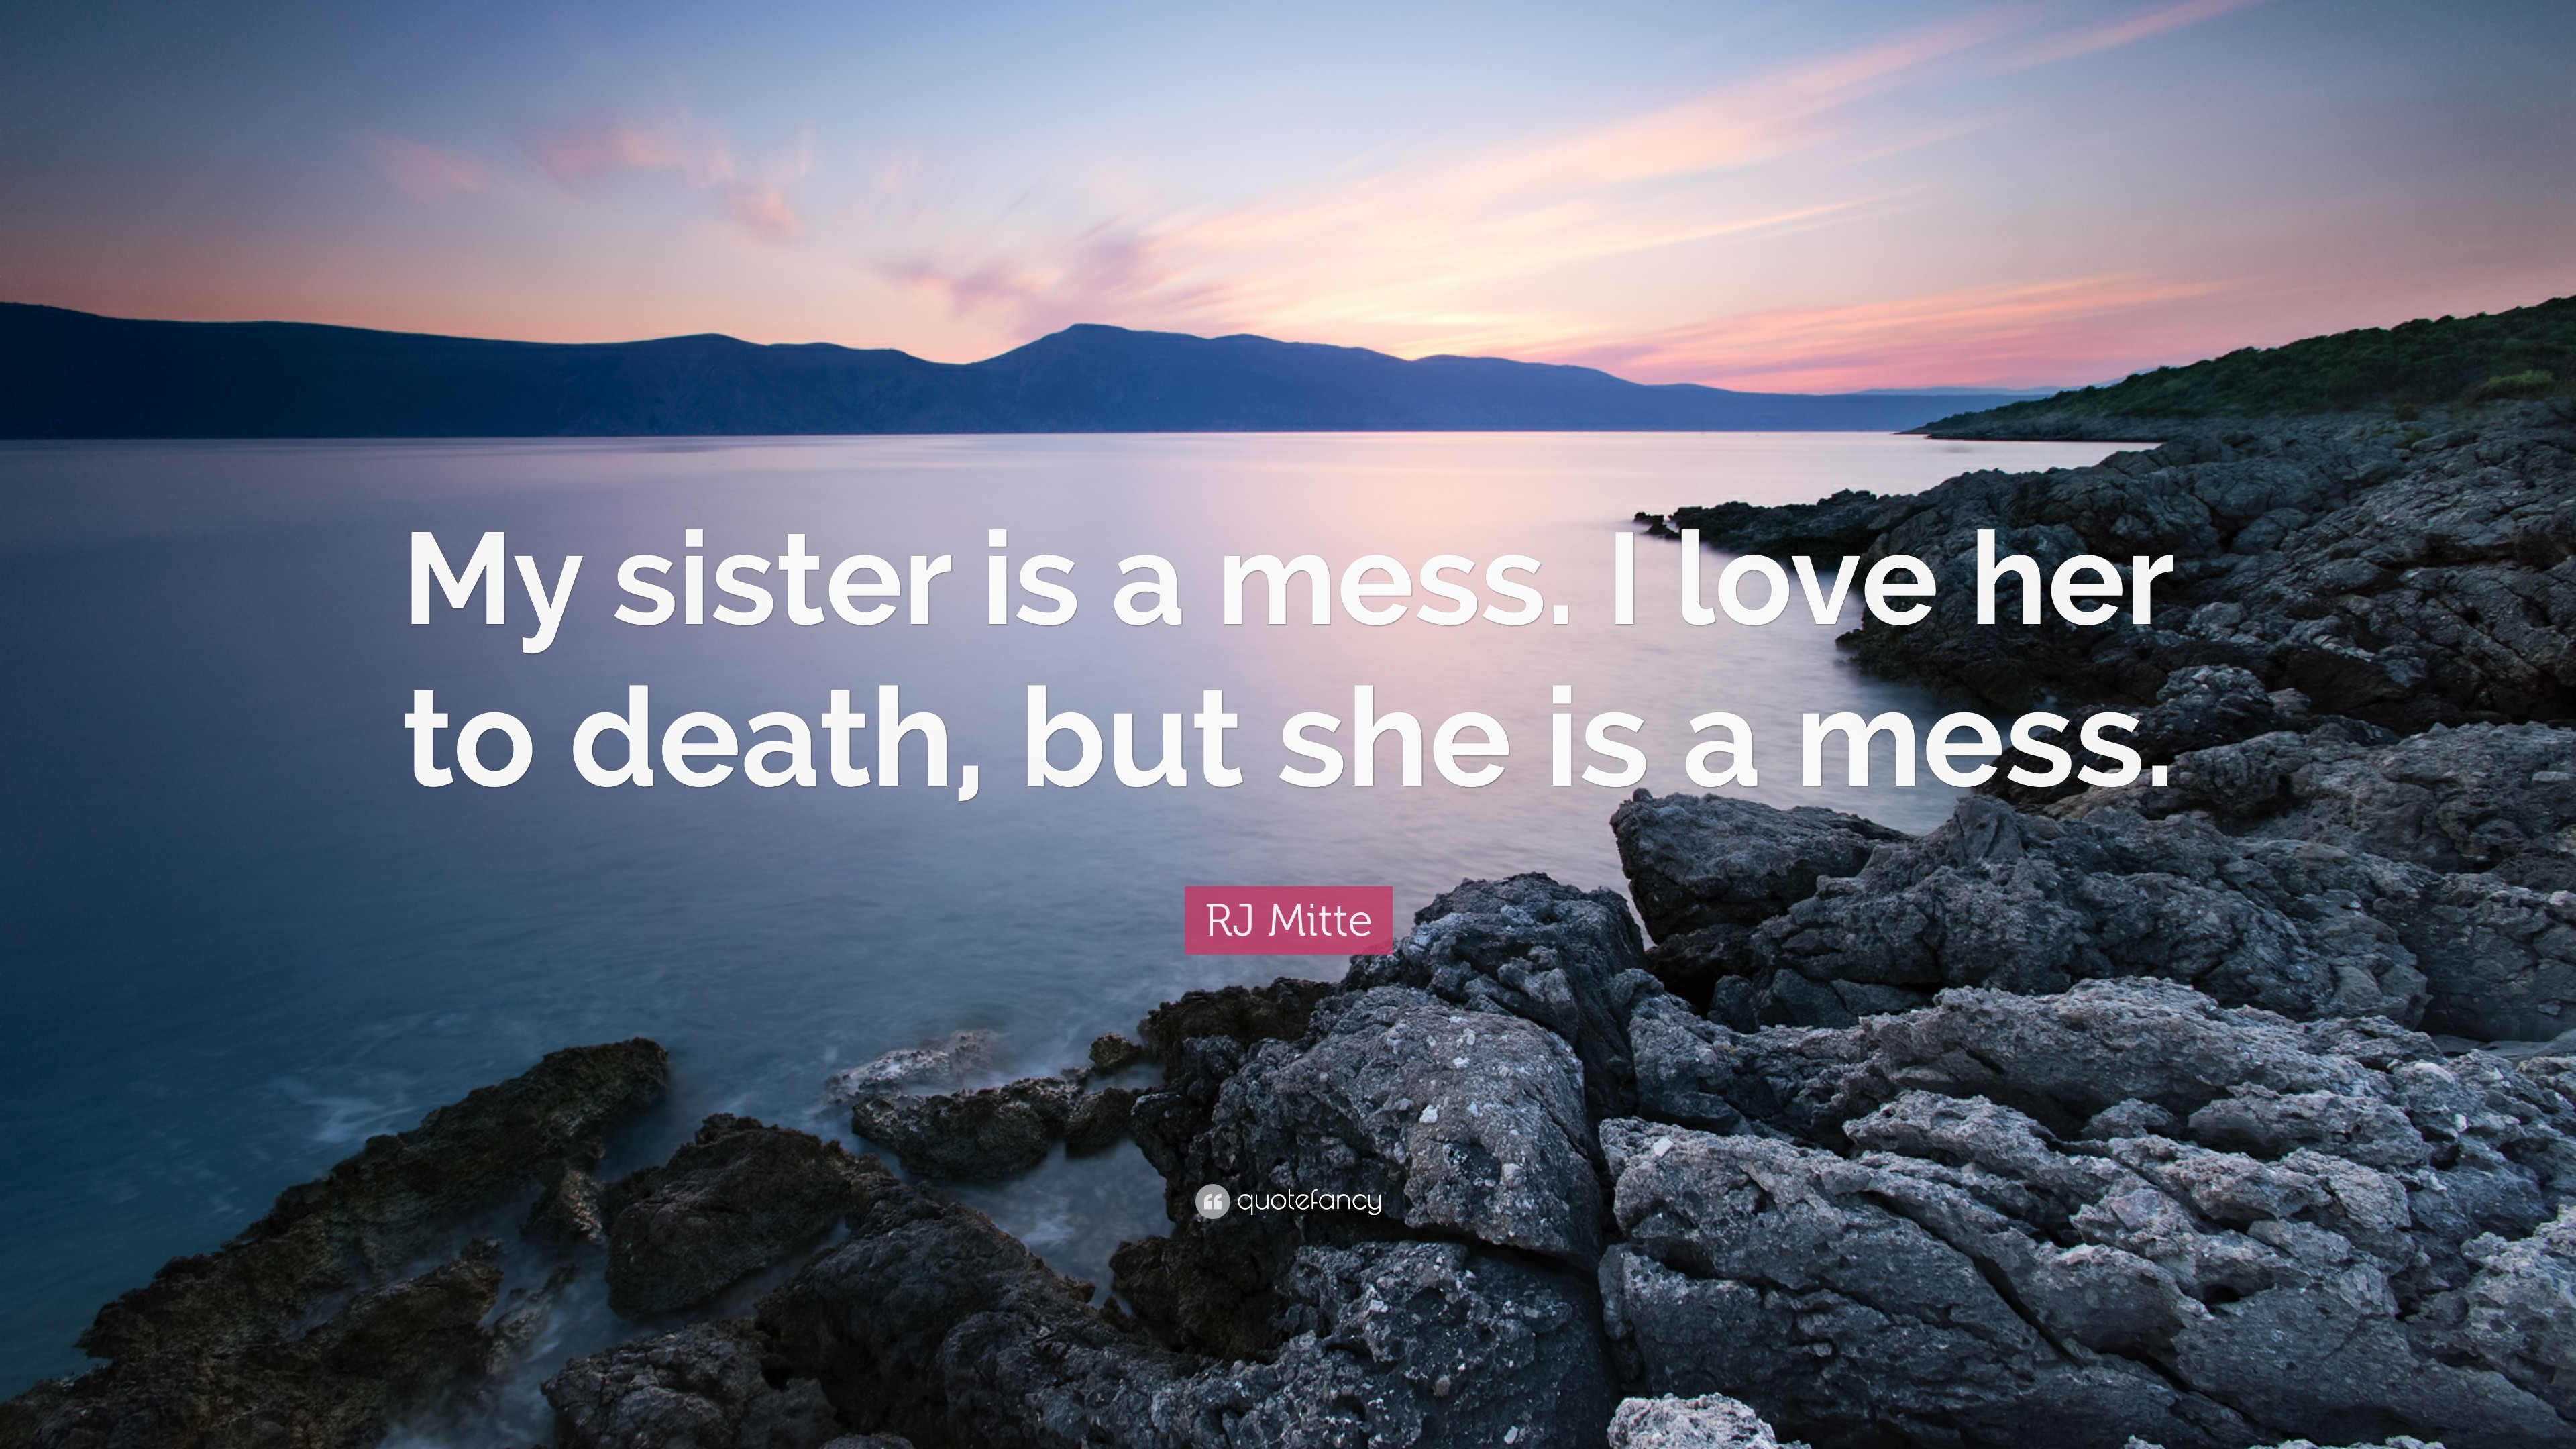 3840x2160 RJ Mitte Quote: “My sister is a mess. I love her to death